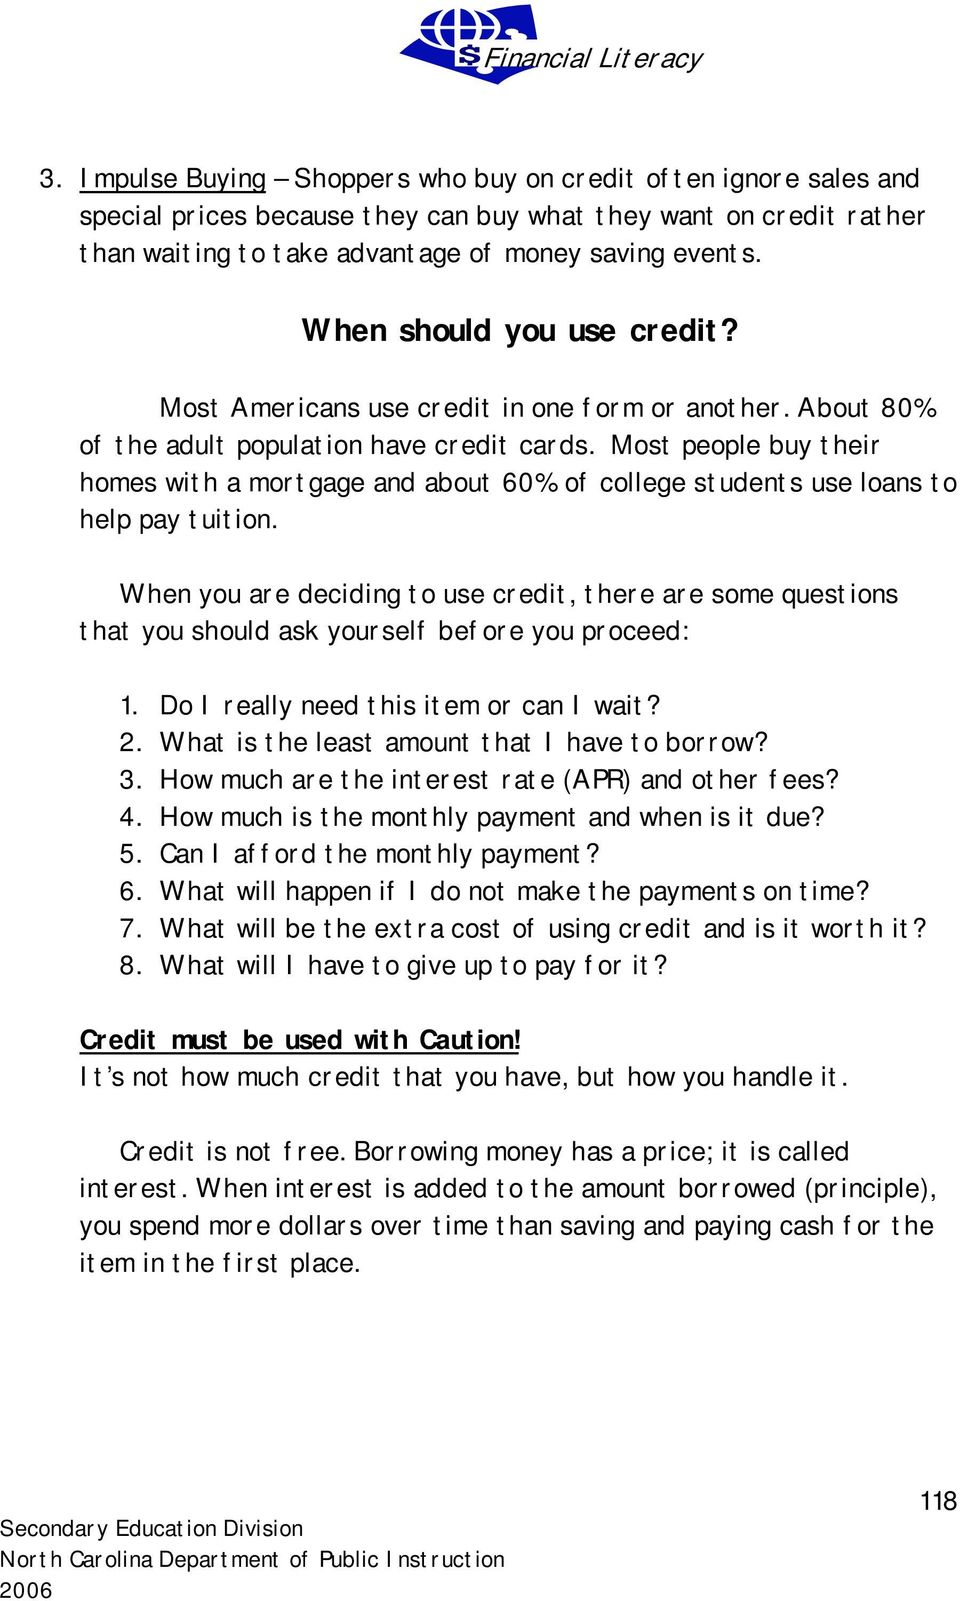 Most people buy their homes with a mortgage and about 60% of college students use loans to help pay tuition.